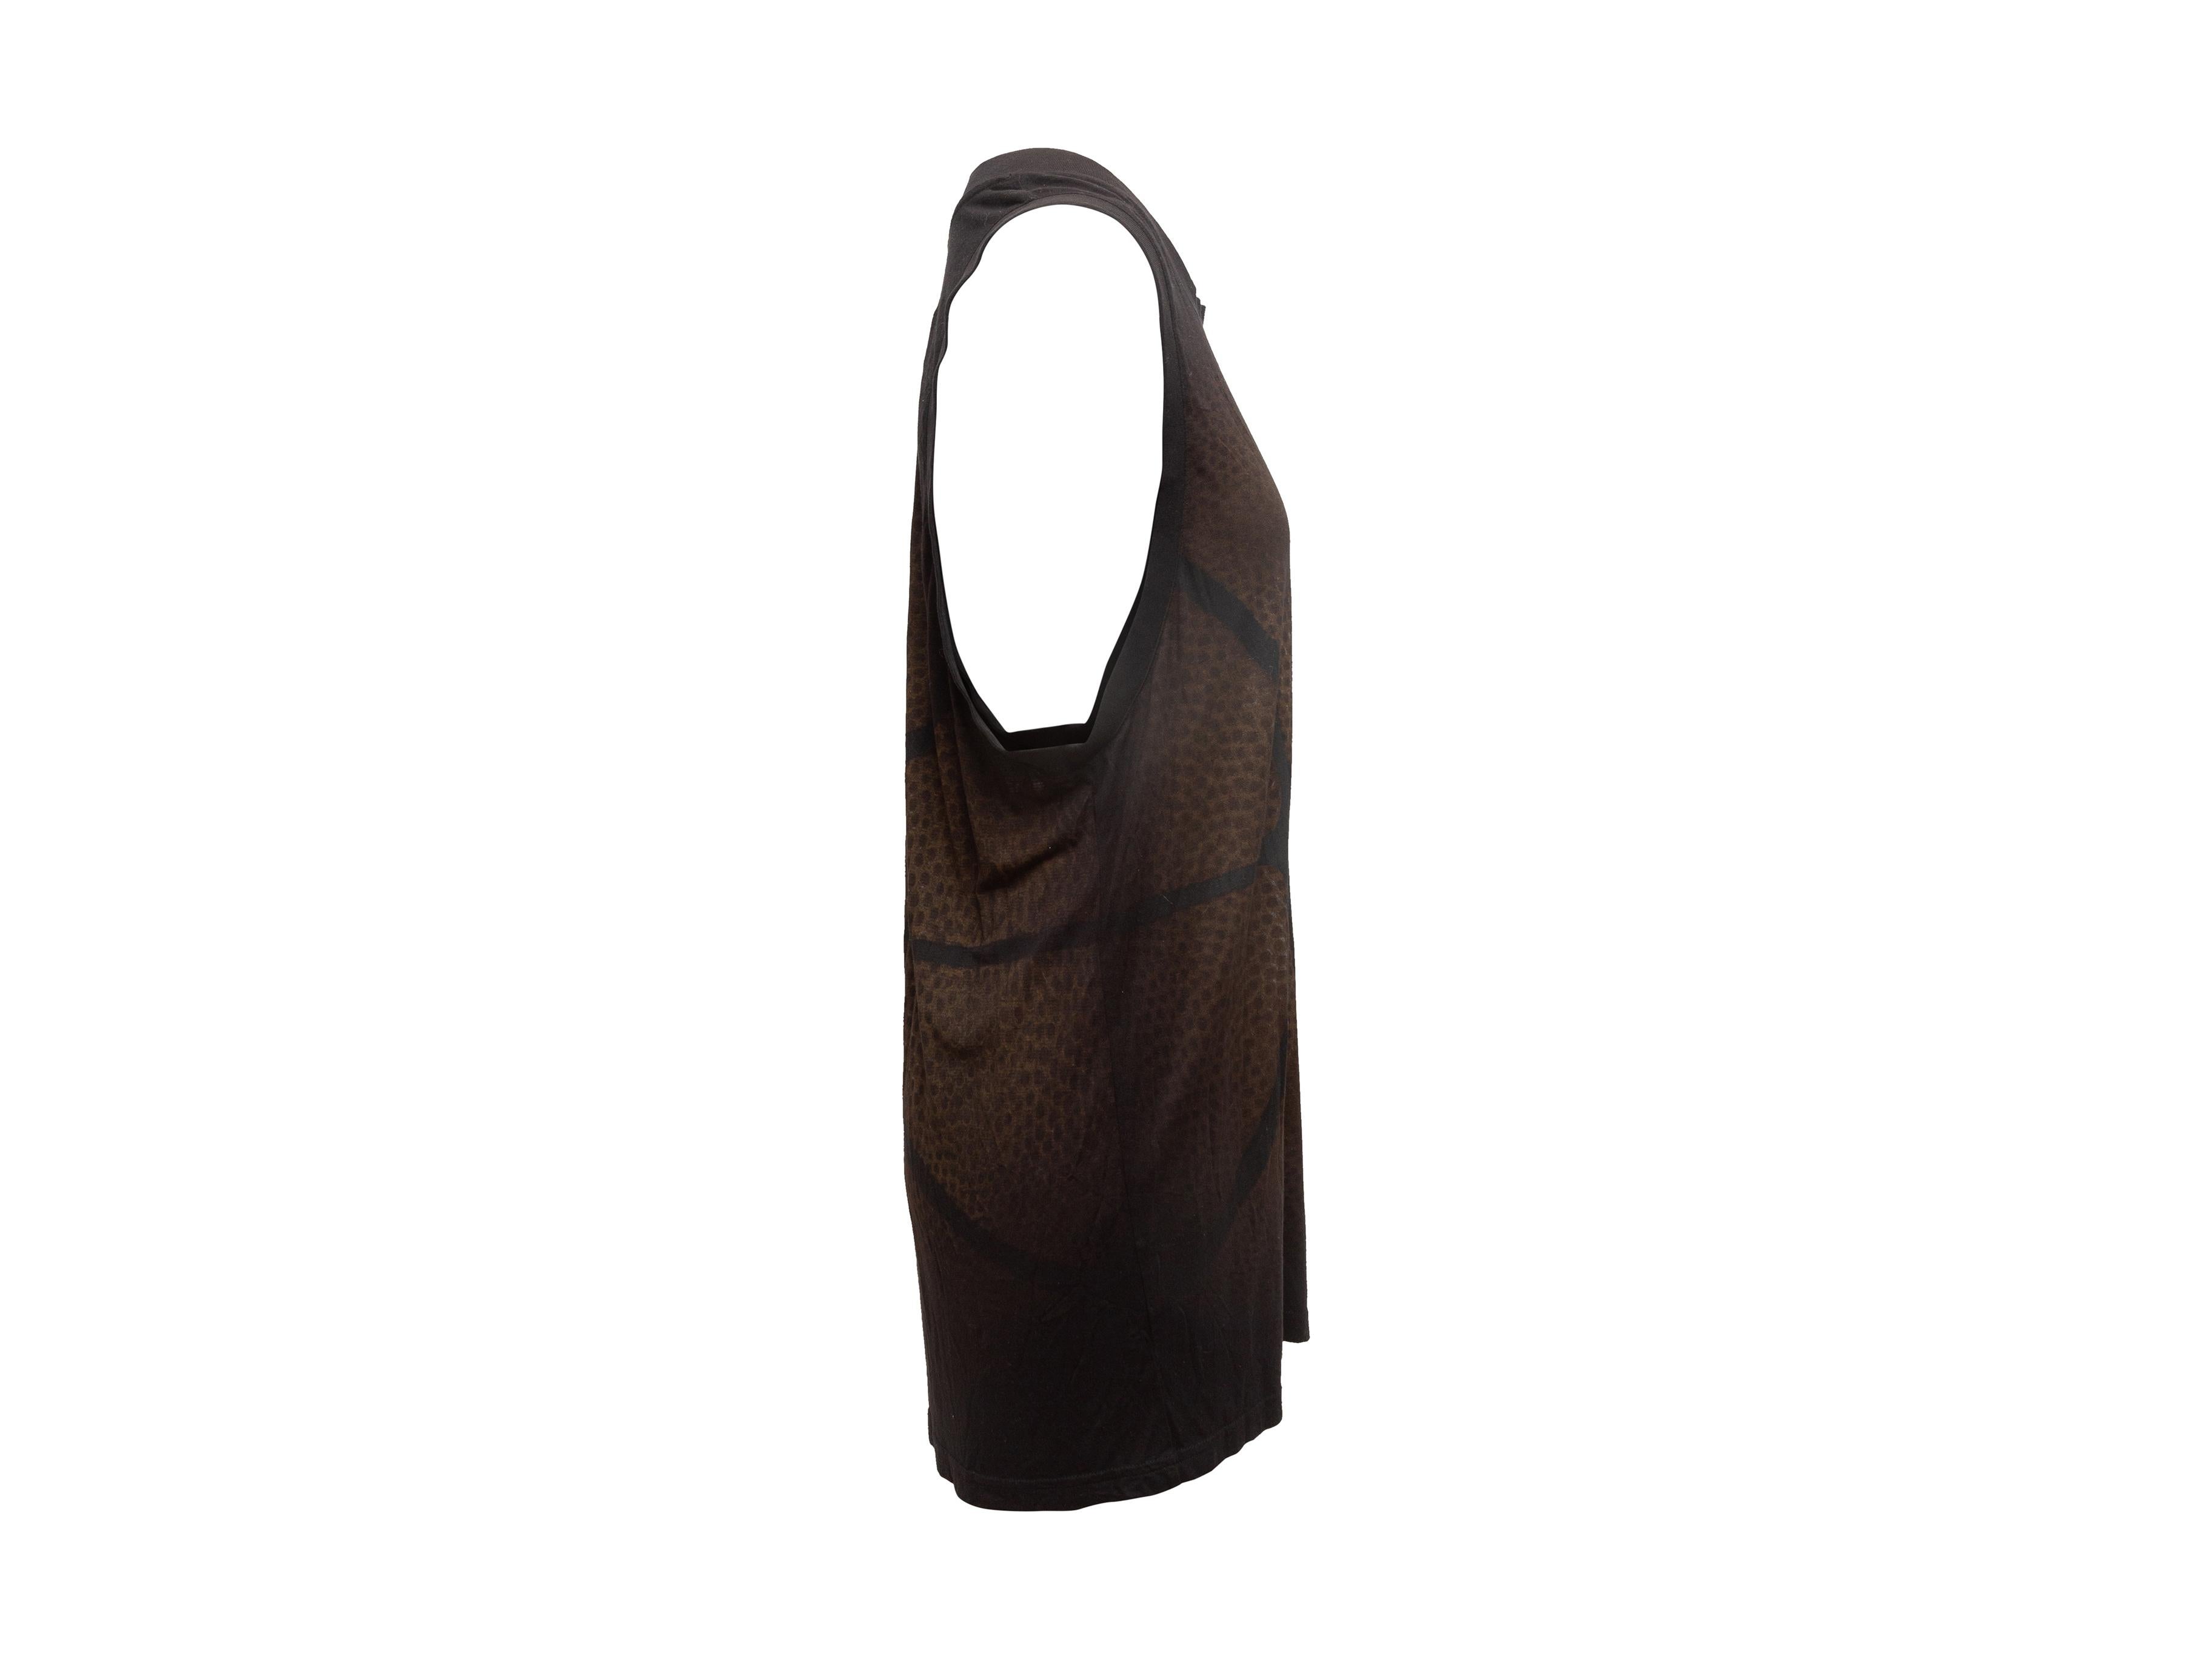 Product details: Black and brown sleeveless basketball print top by Givenchy. Crew neck. 46